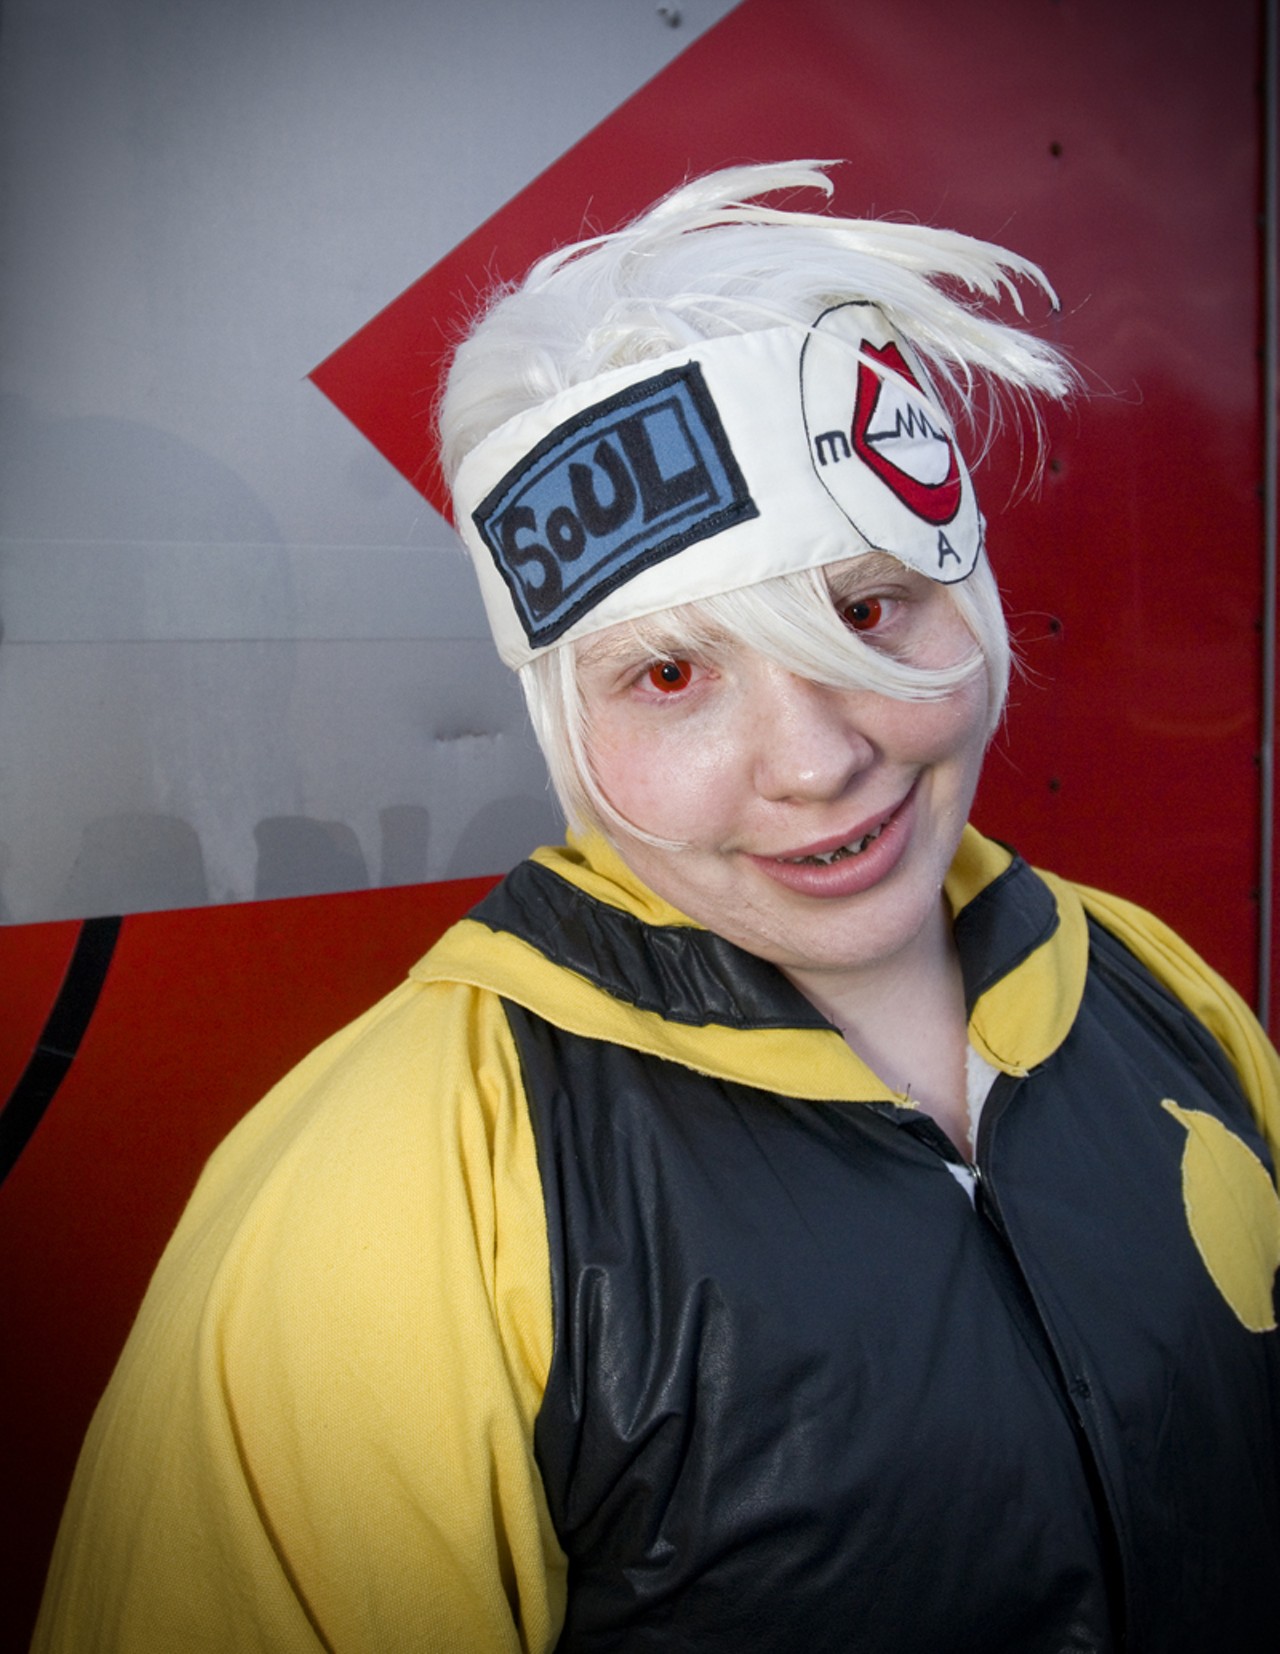 Jessica Chelmecki, 18, traveled from Chicago to show off her Soul Eater costume at Bishie Con 2009 in St. Louis.